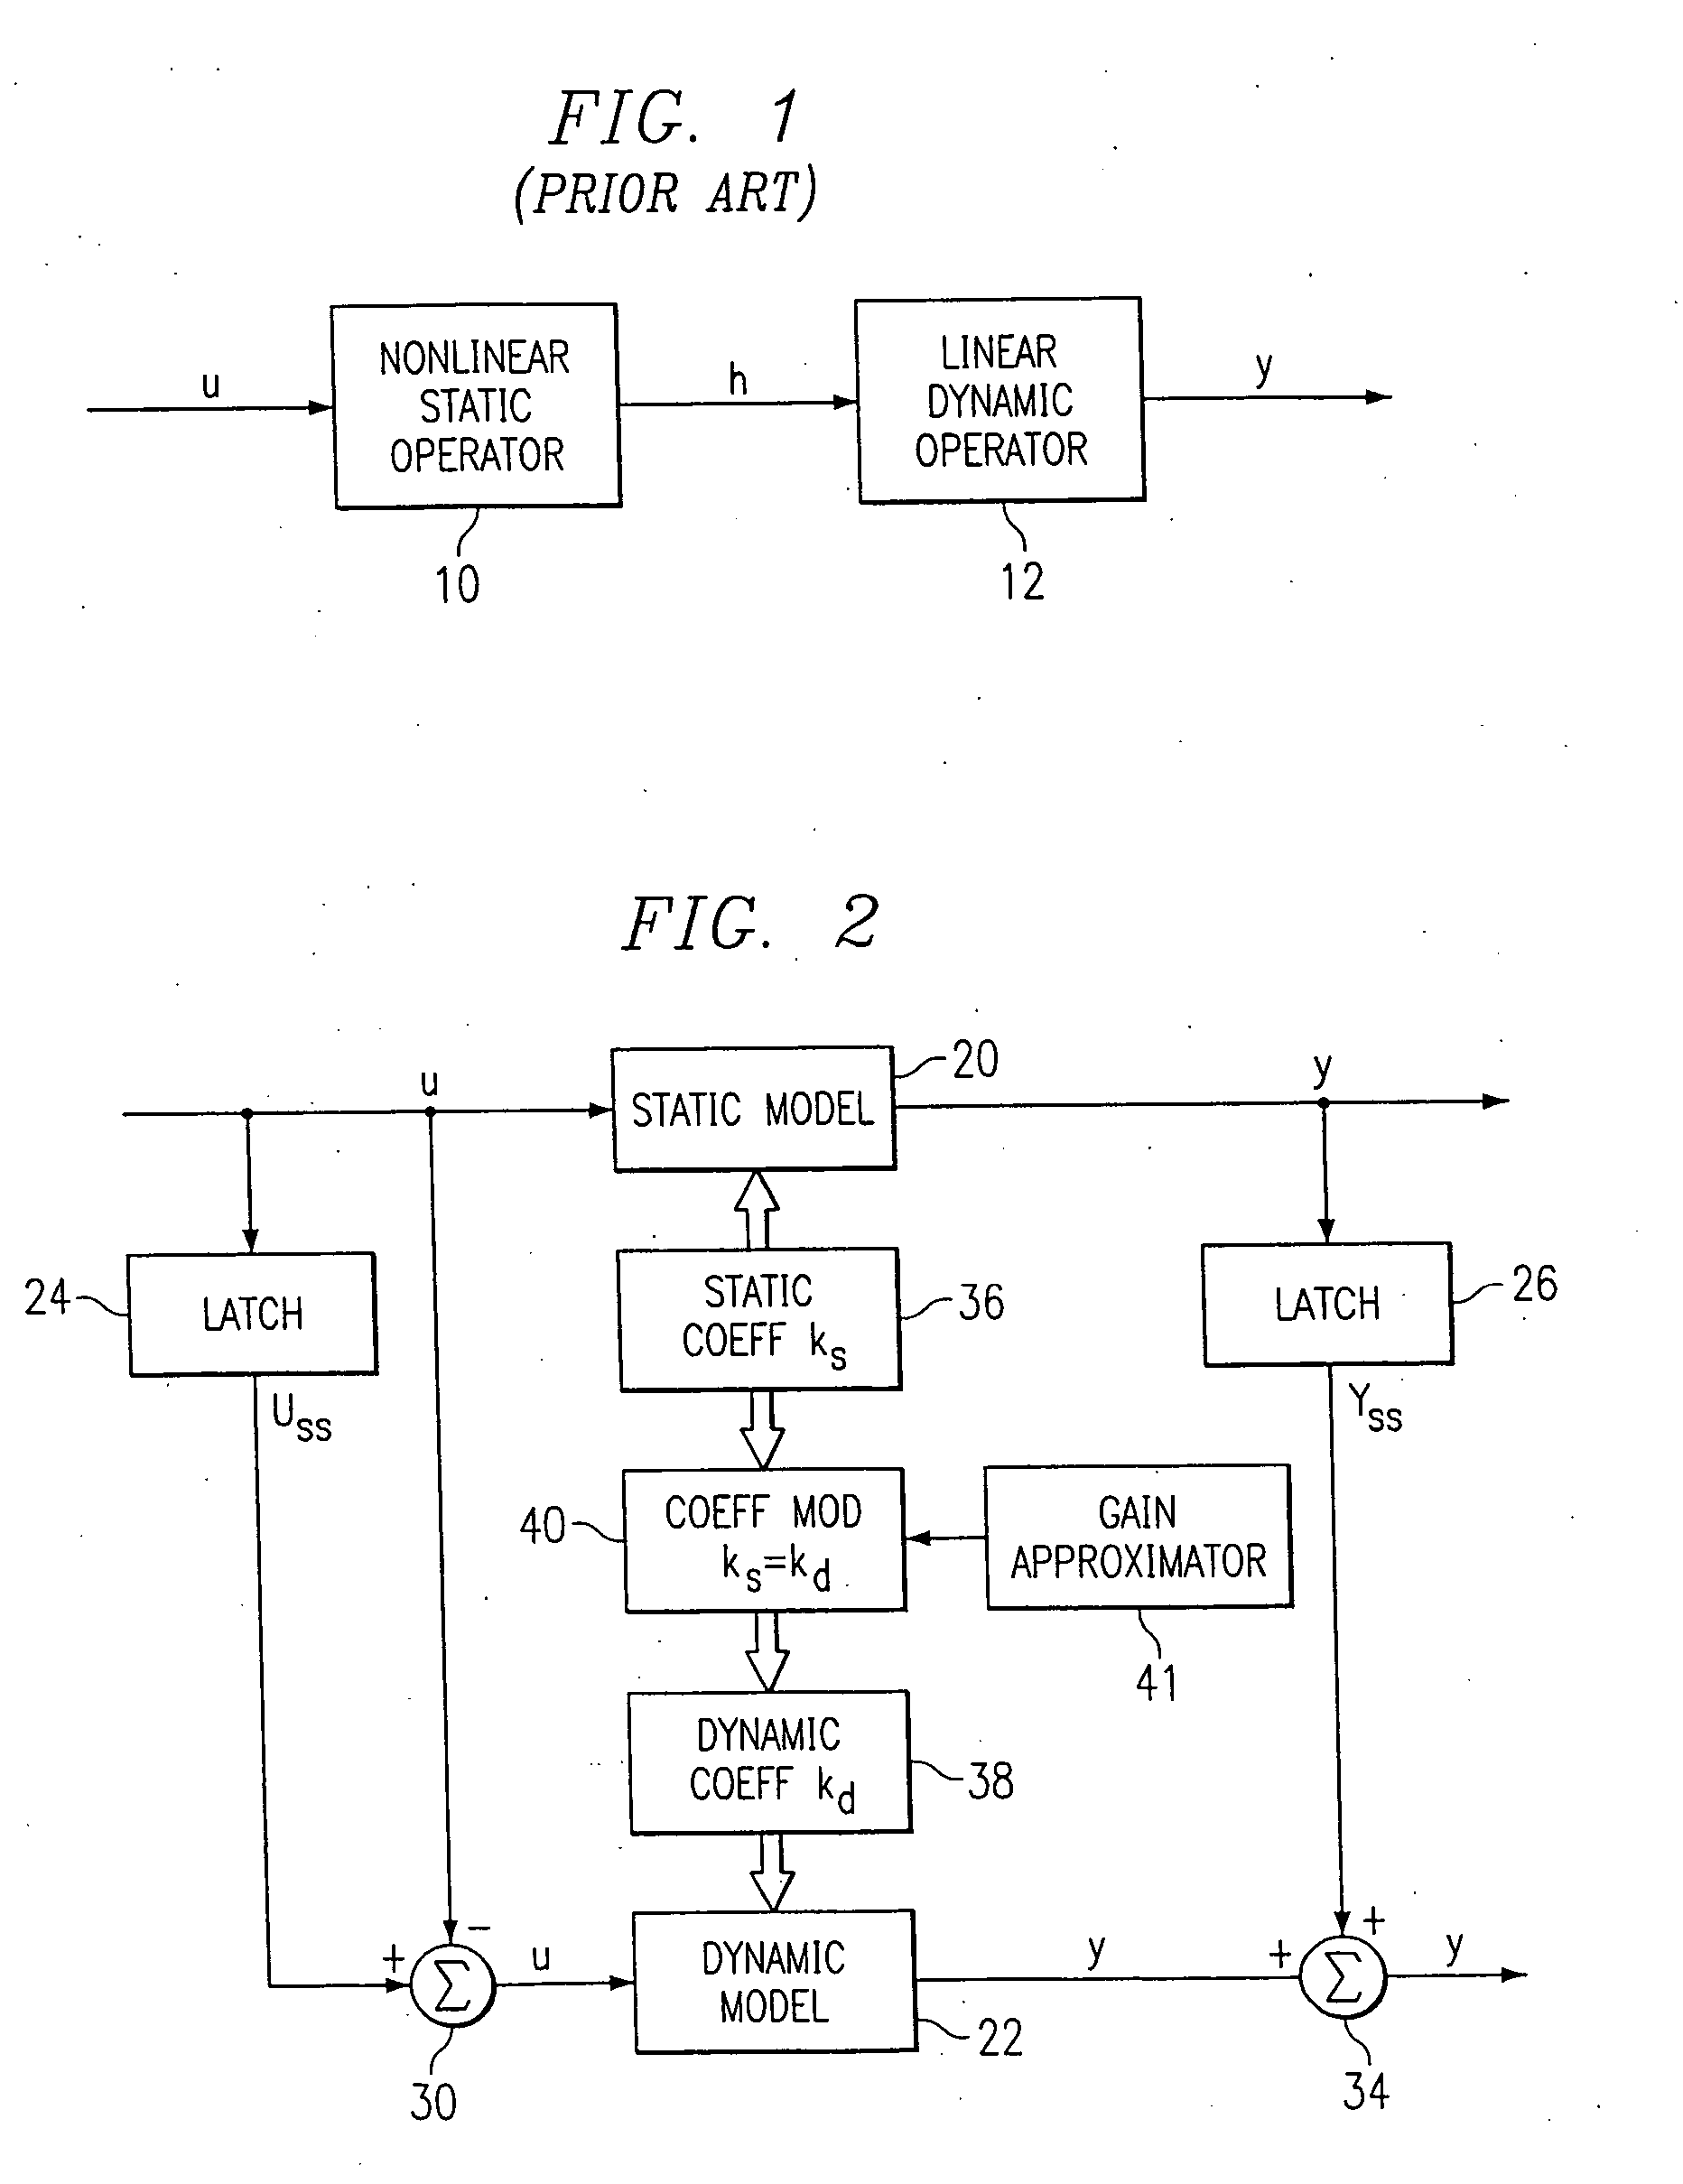 Method and apparatus for minimizing error in dynamic and steady-state processes for prediction, control, and optimization